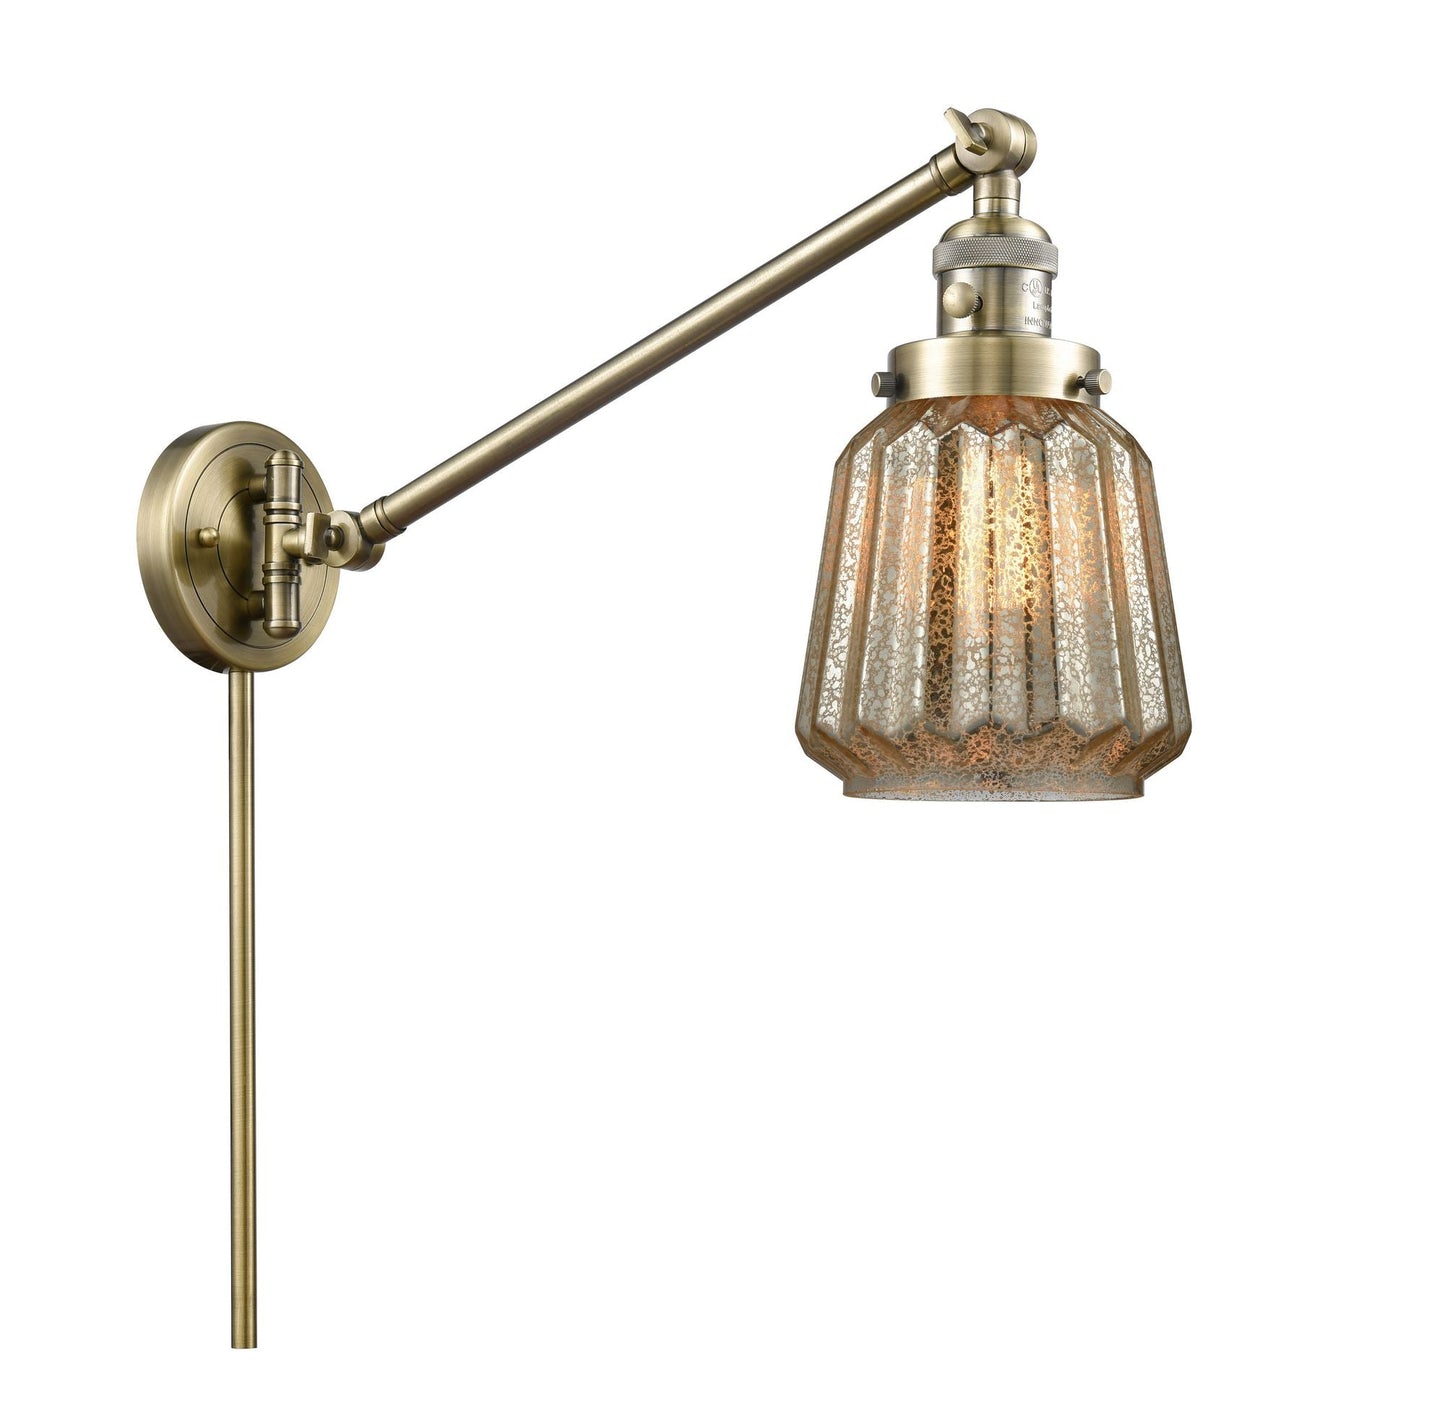 1-Light 8" Chatham Swing Arm With Switch - Novelty Mercury Glass - Choice of Finish And Incandesent Or LED Bulbs